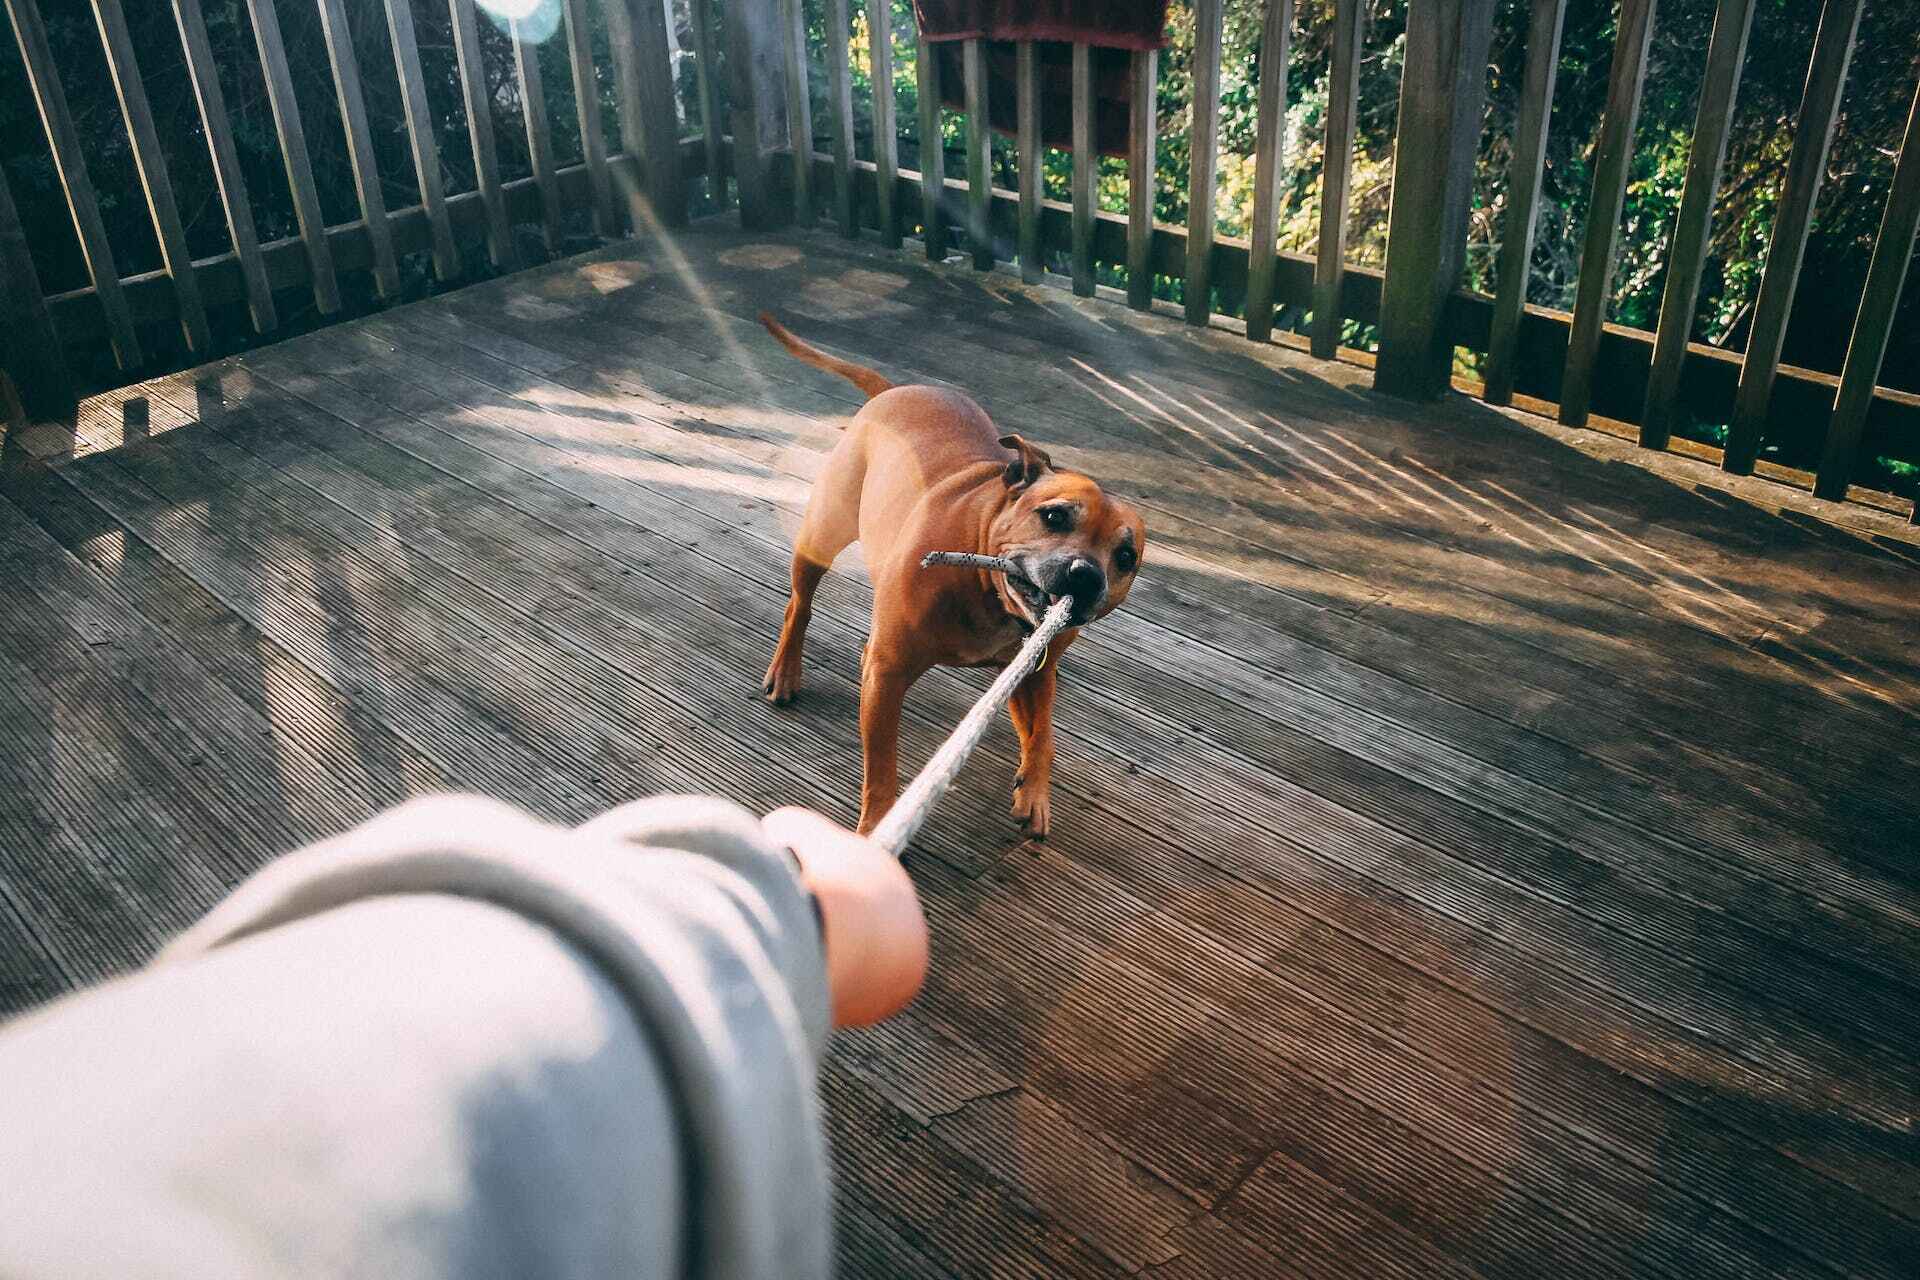 A man playing tug of war with his dog in a balcony